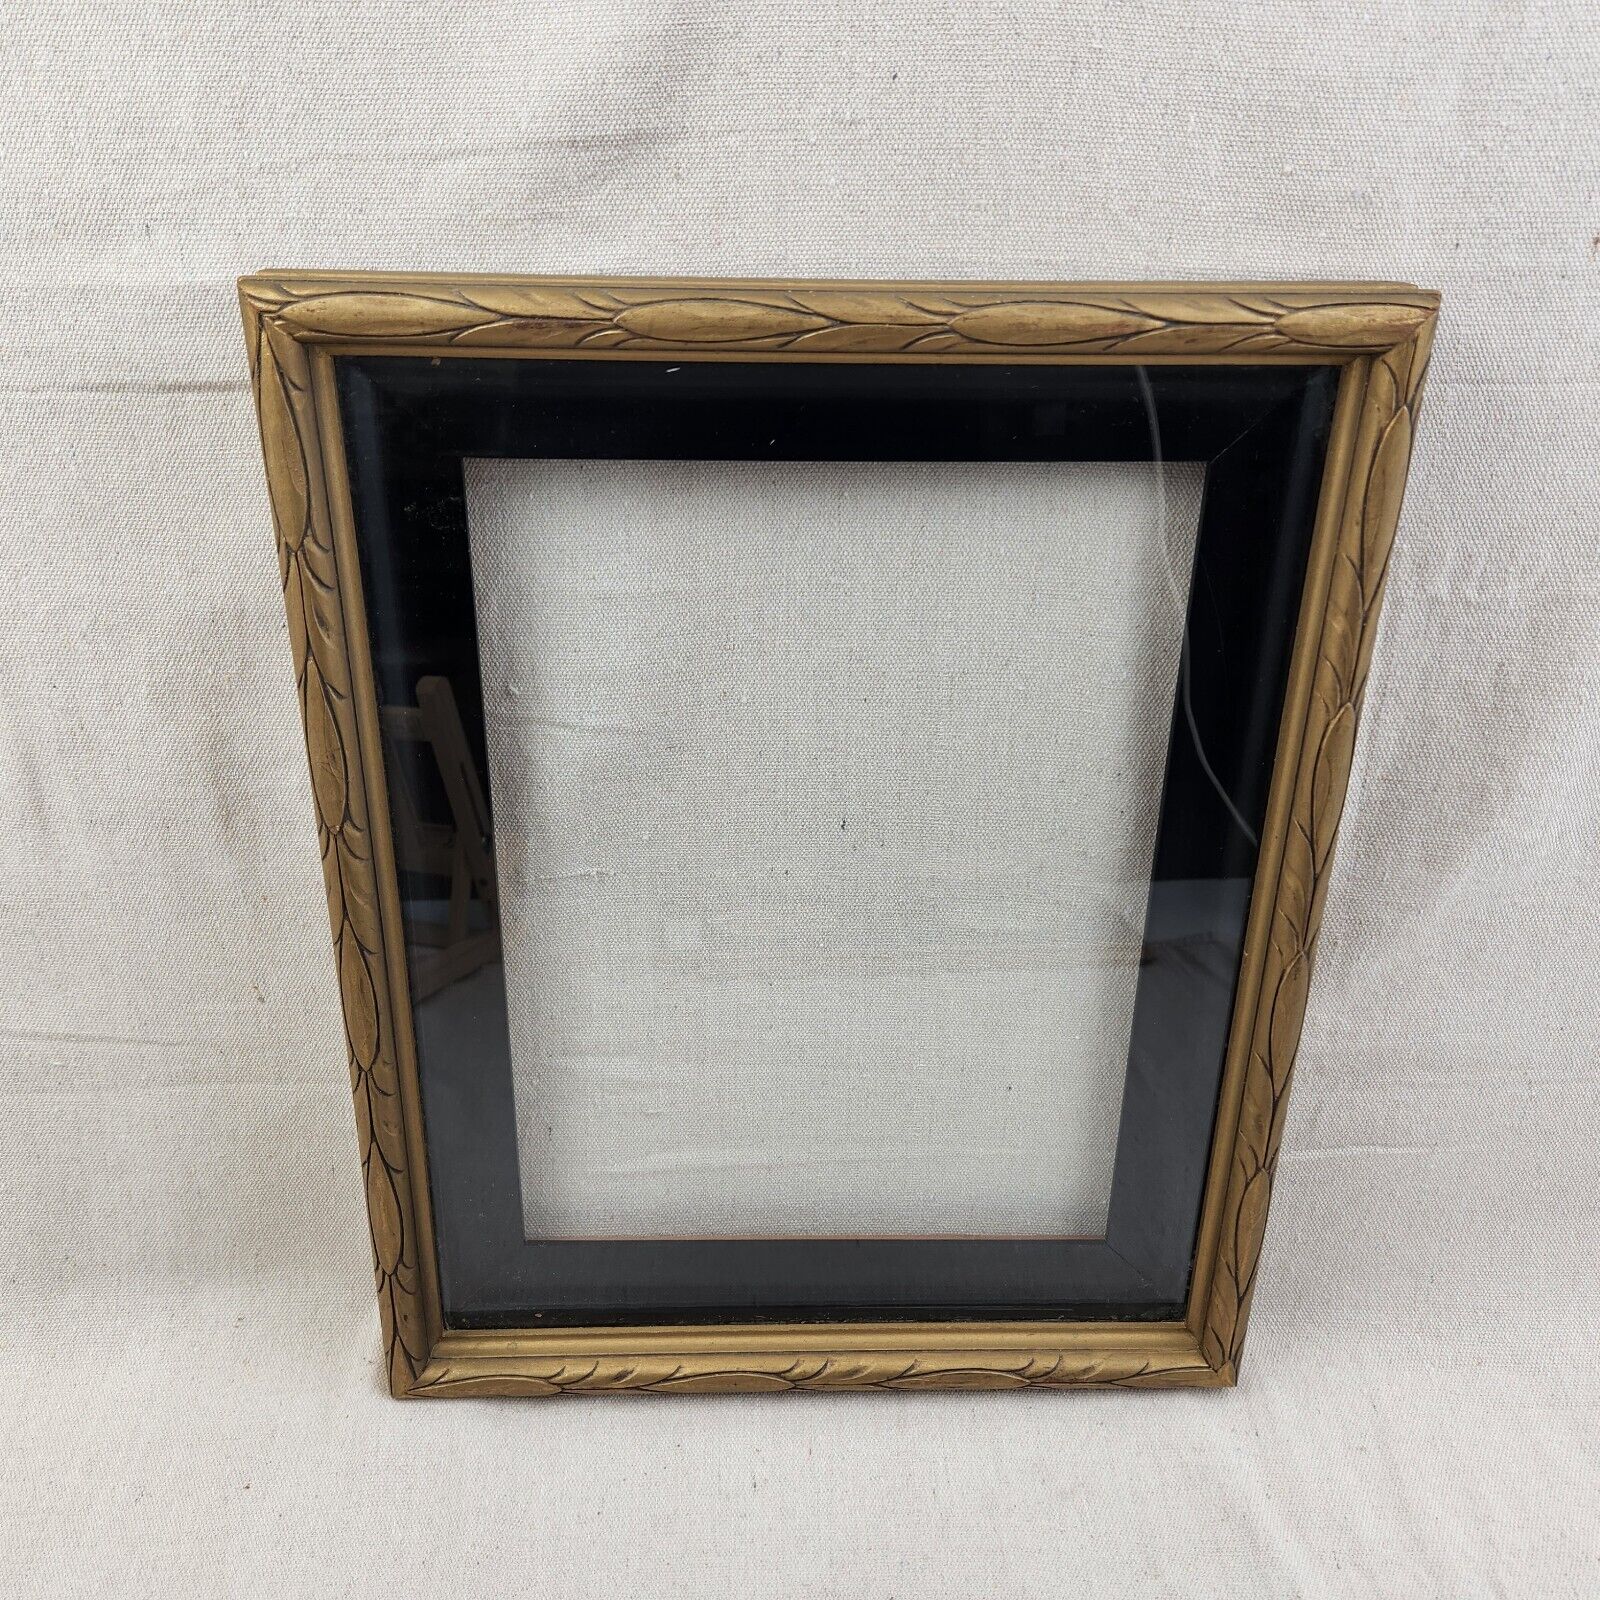 Vintage Ornate 1930s Antique 13 x 17 Carved Wood Picture Frame Liner With Glass